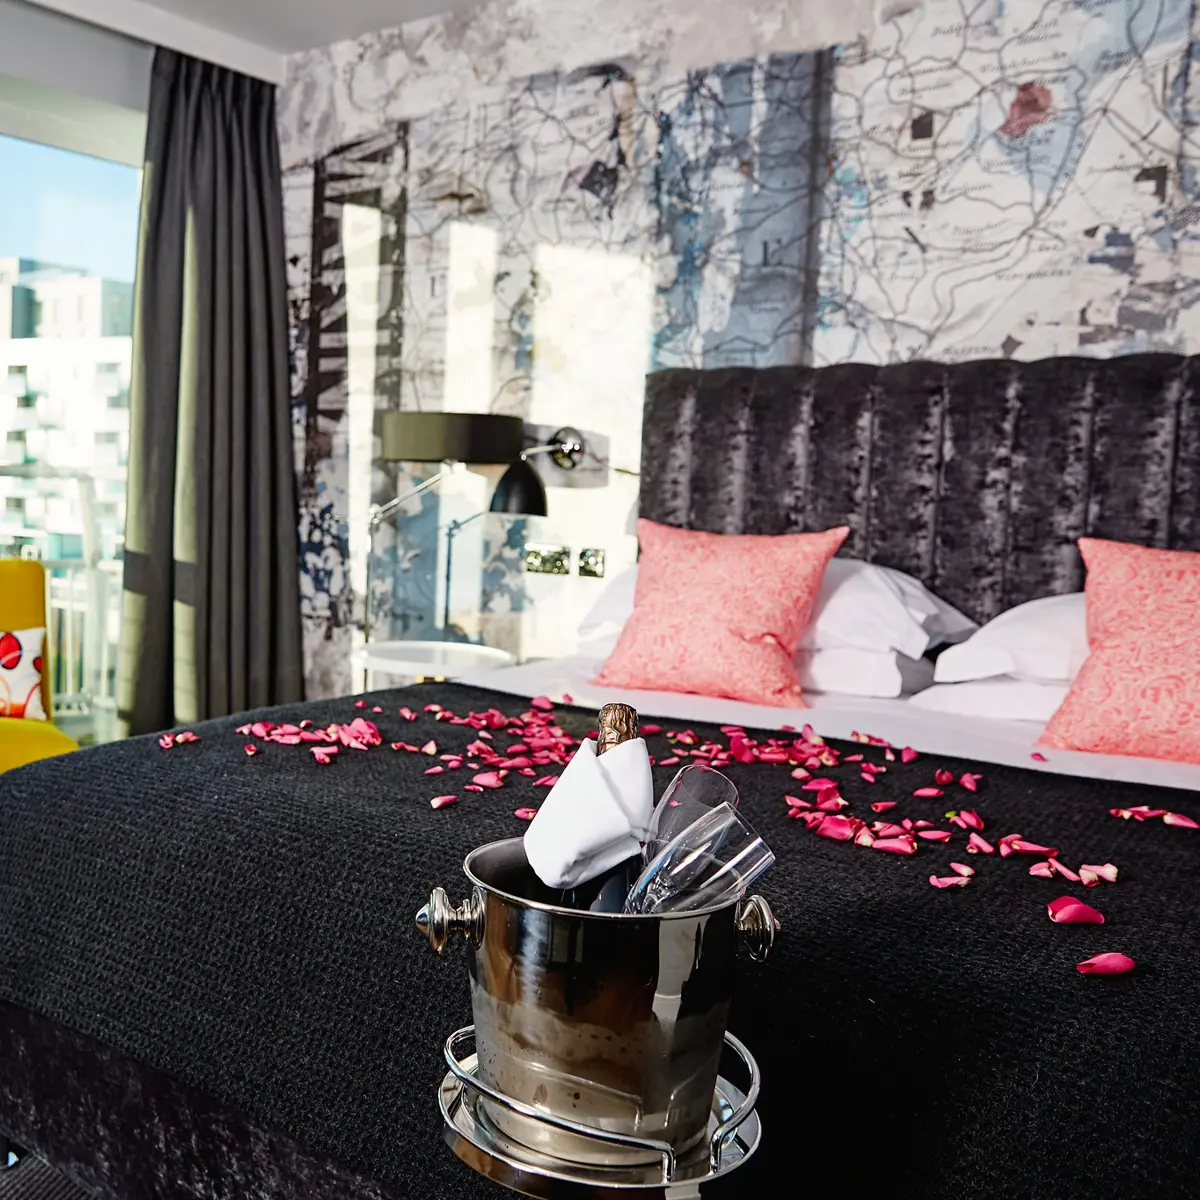 A well-furnished bedroom featuring a comfortable bed decorated with pink petals, a cozy chair, and a large window.